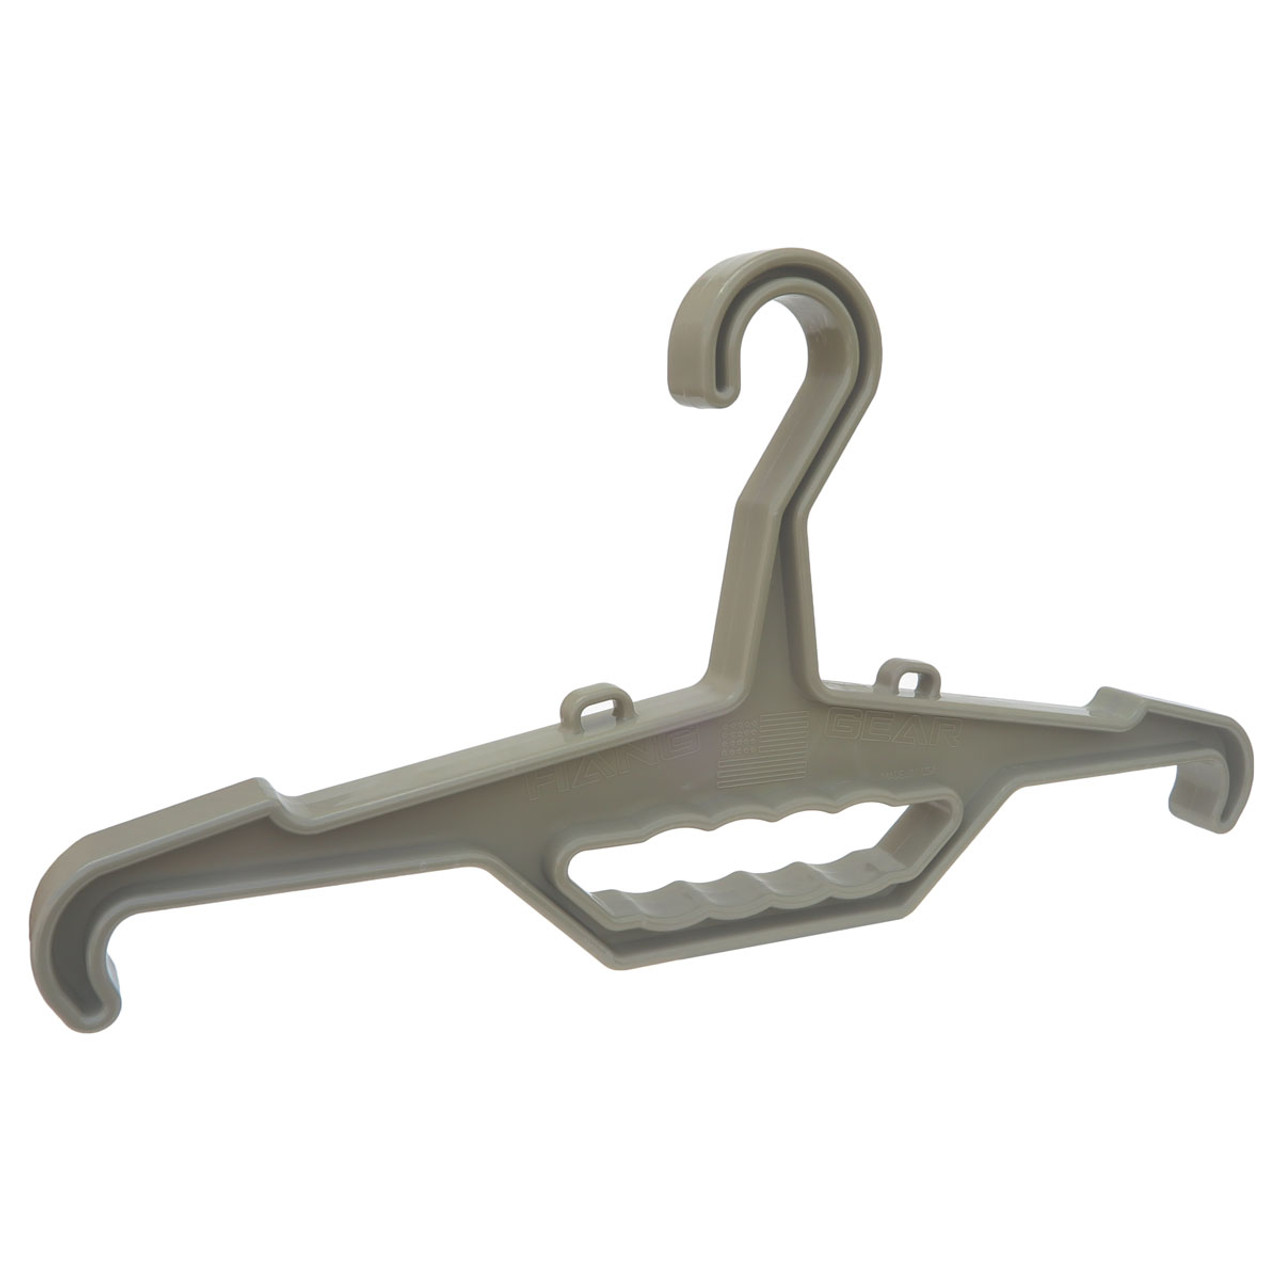 The Strongest Heavy Duty Hanger, USA Made